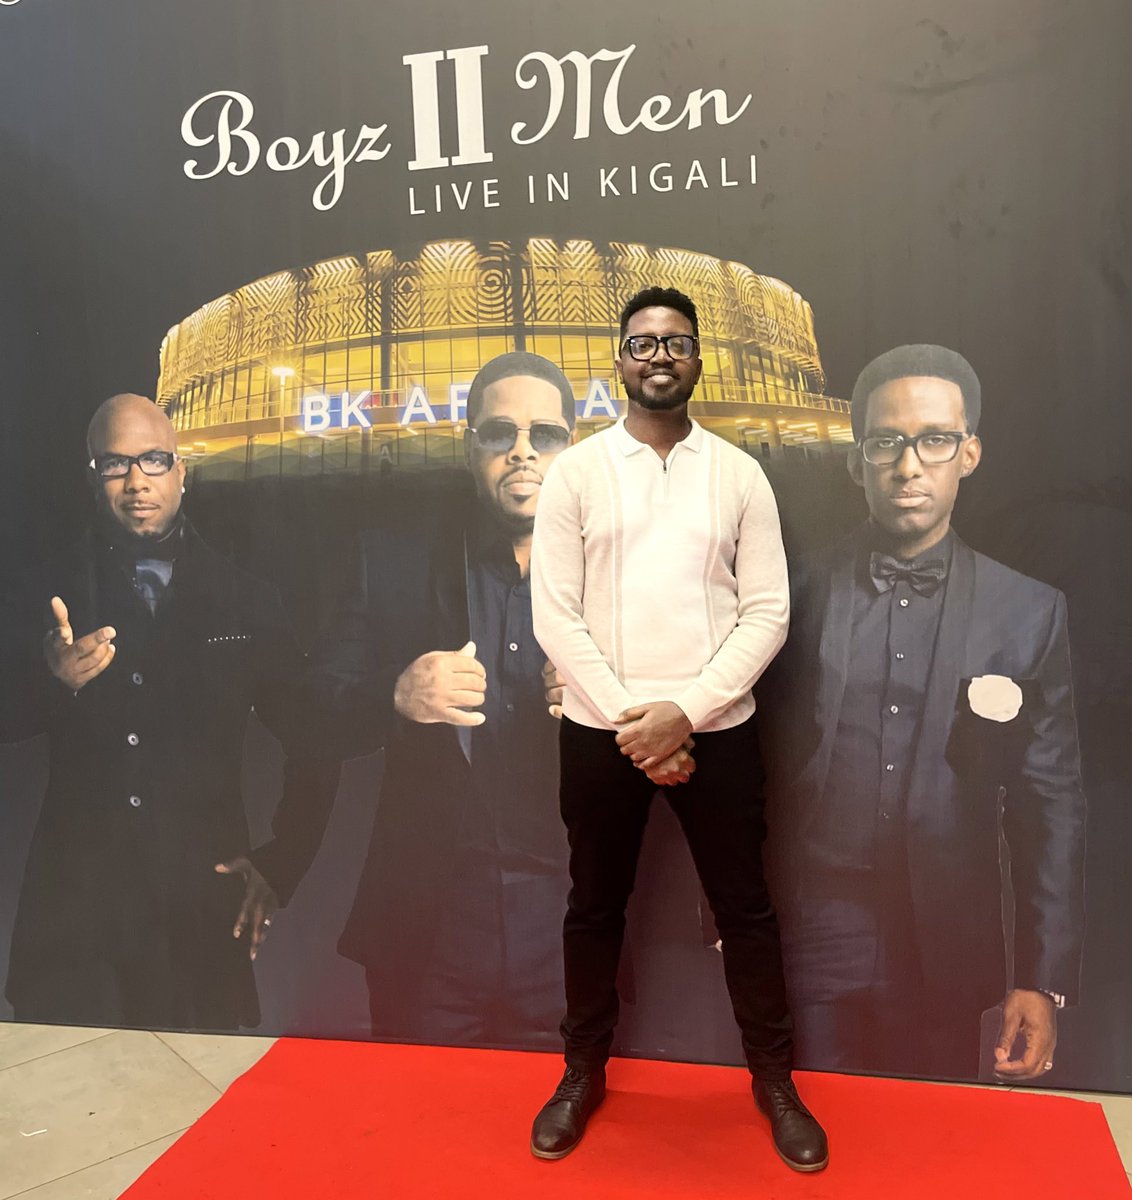 Just another dapper brother representing the 256 in the 250
🔥📍 @bkarenarw #BoyzIIMenLive